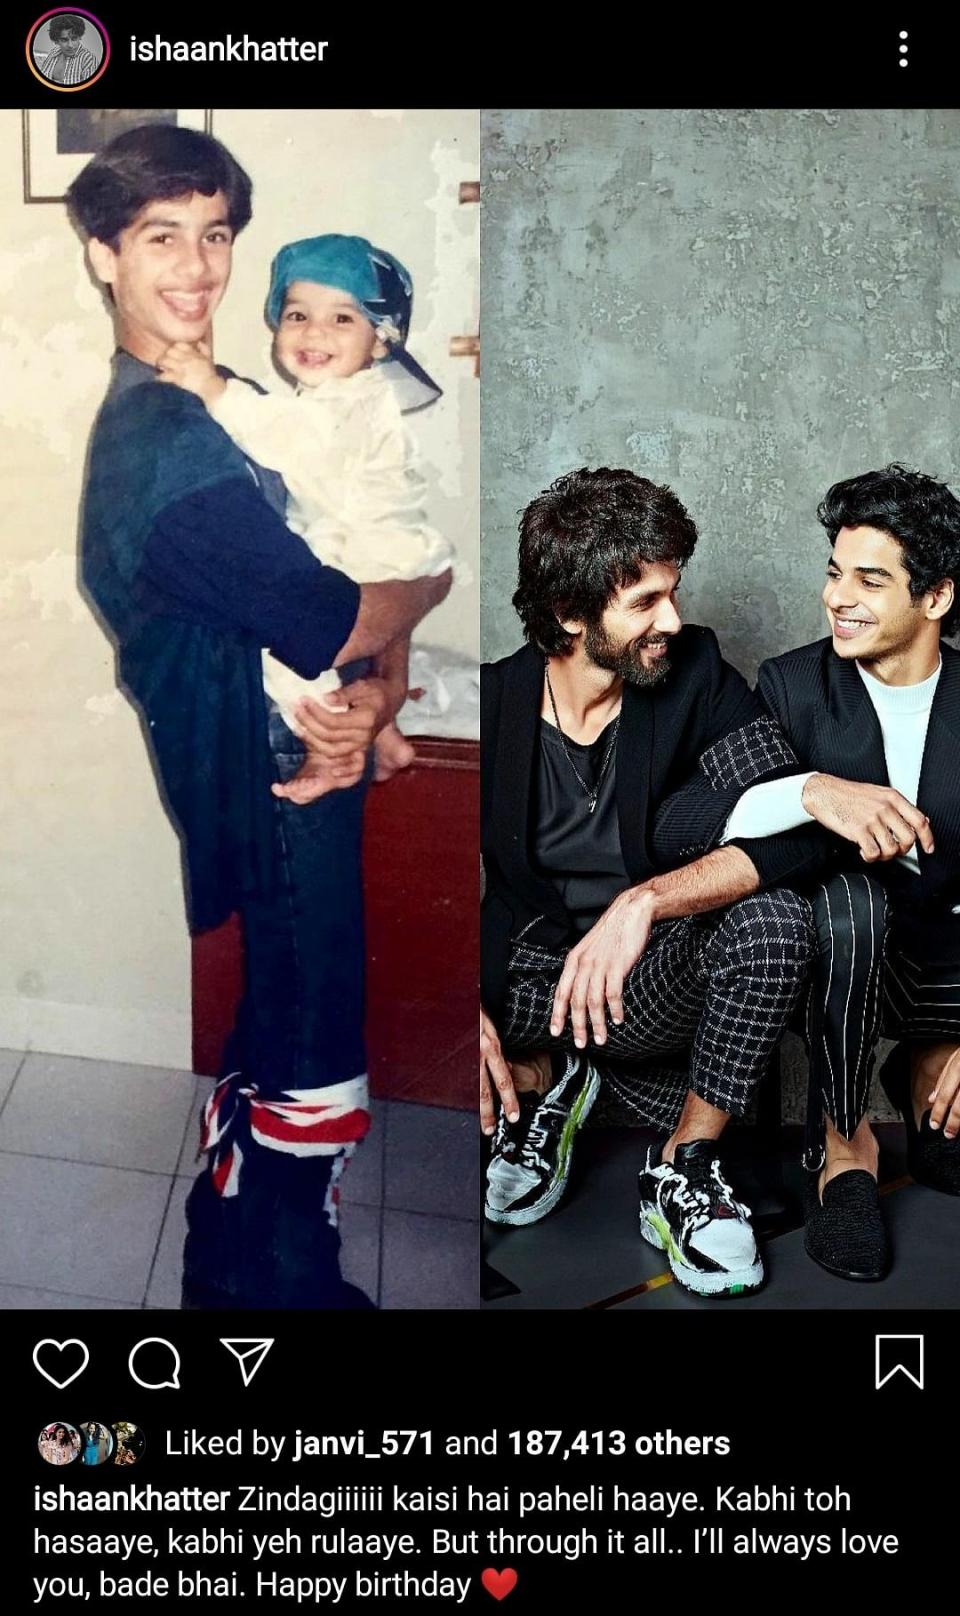 Ishaan Khatter’s Instagram post with then and now pictures of the duo